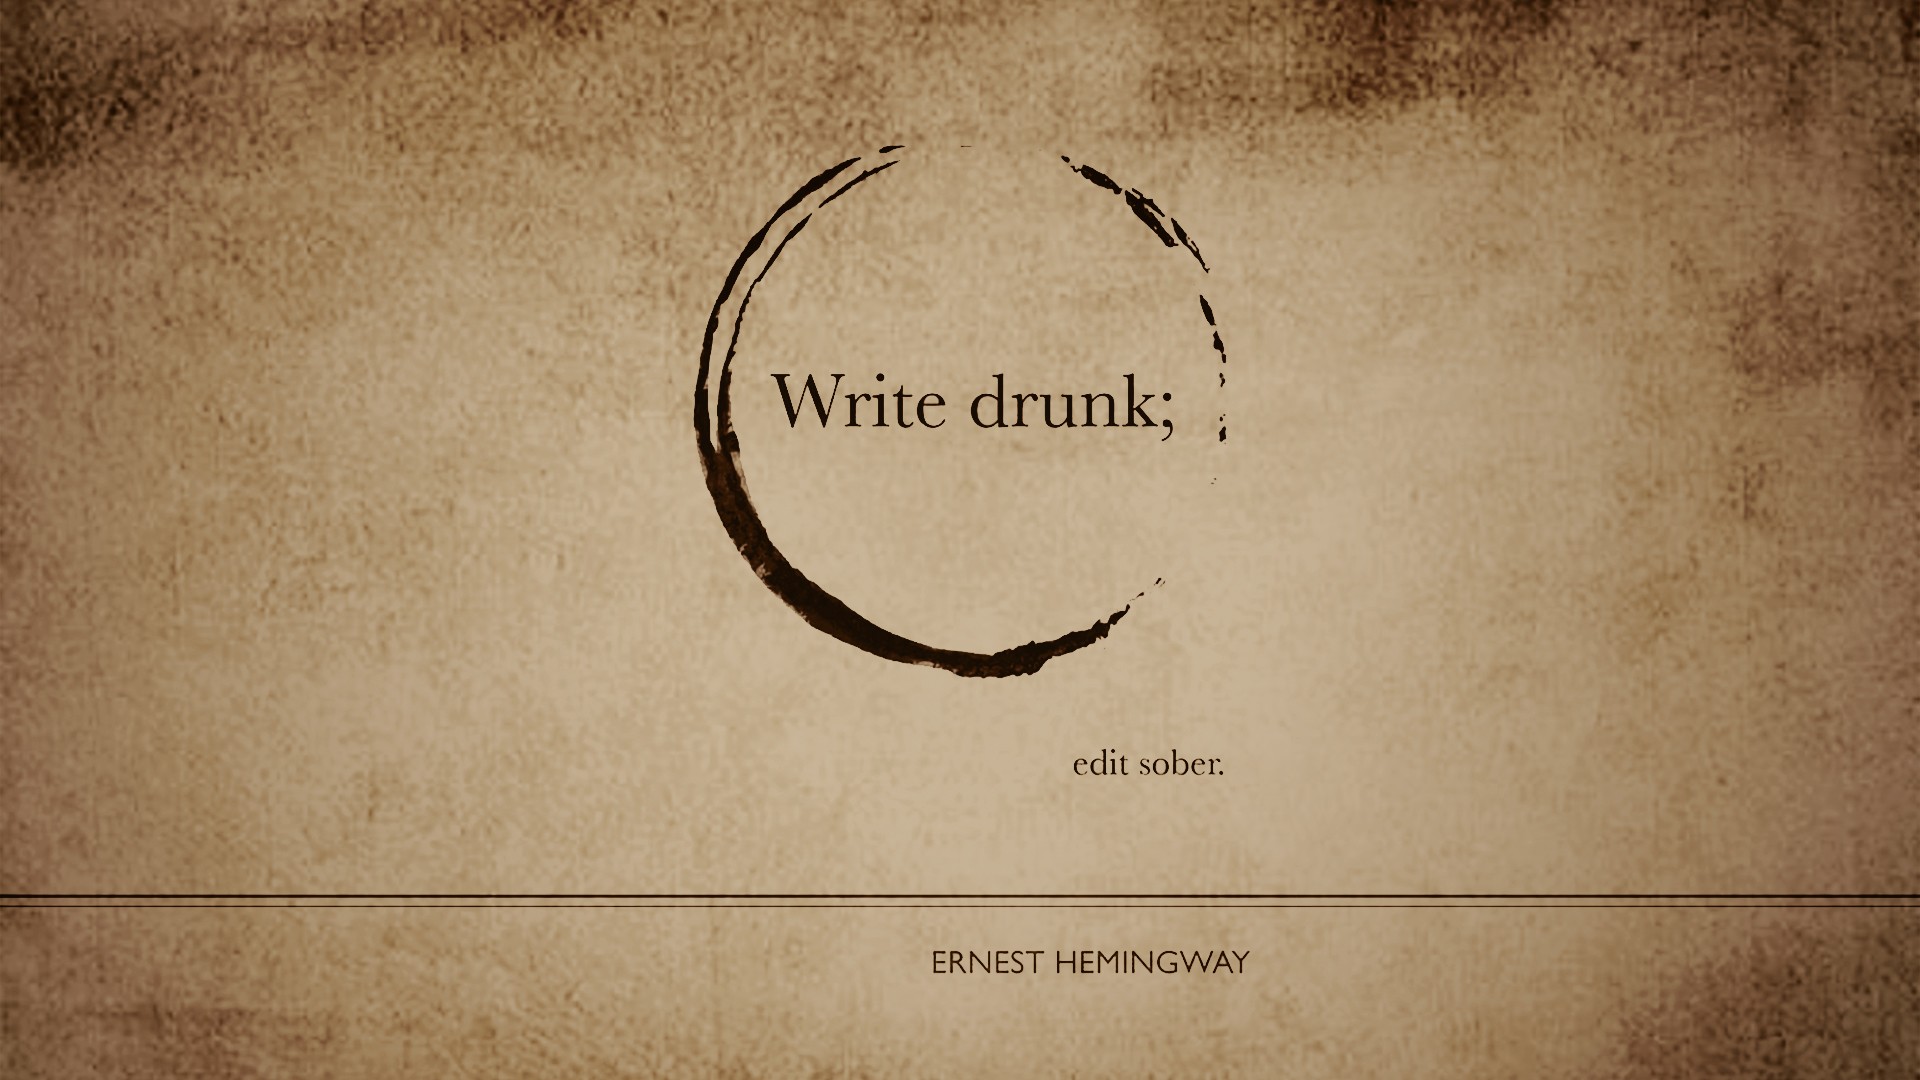 Ernest Hemingway, Book quotes, Artwork, Quote, Misattributed quotes Wallpaper